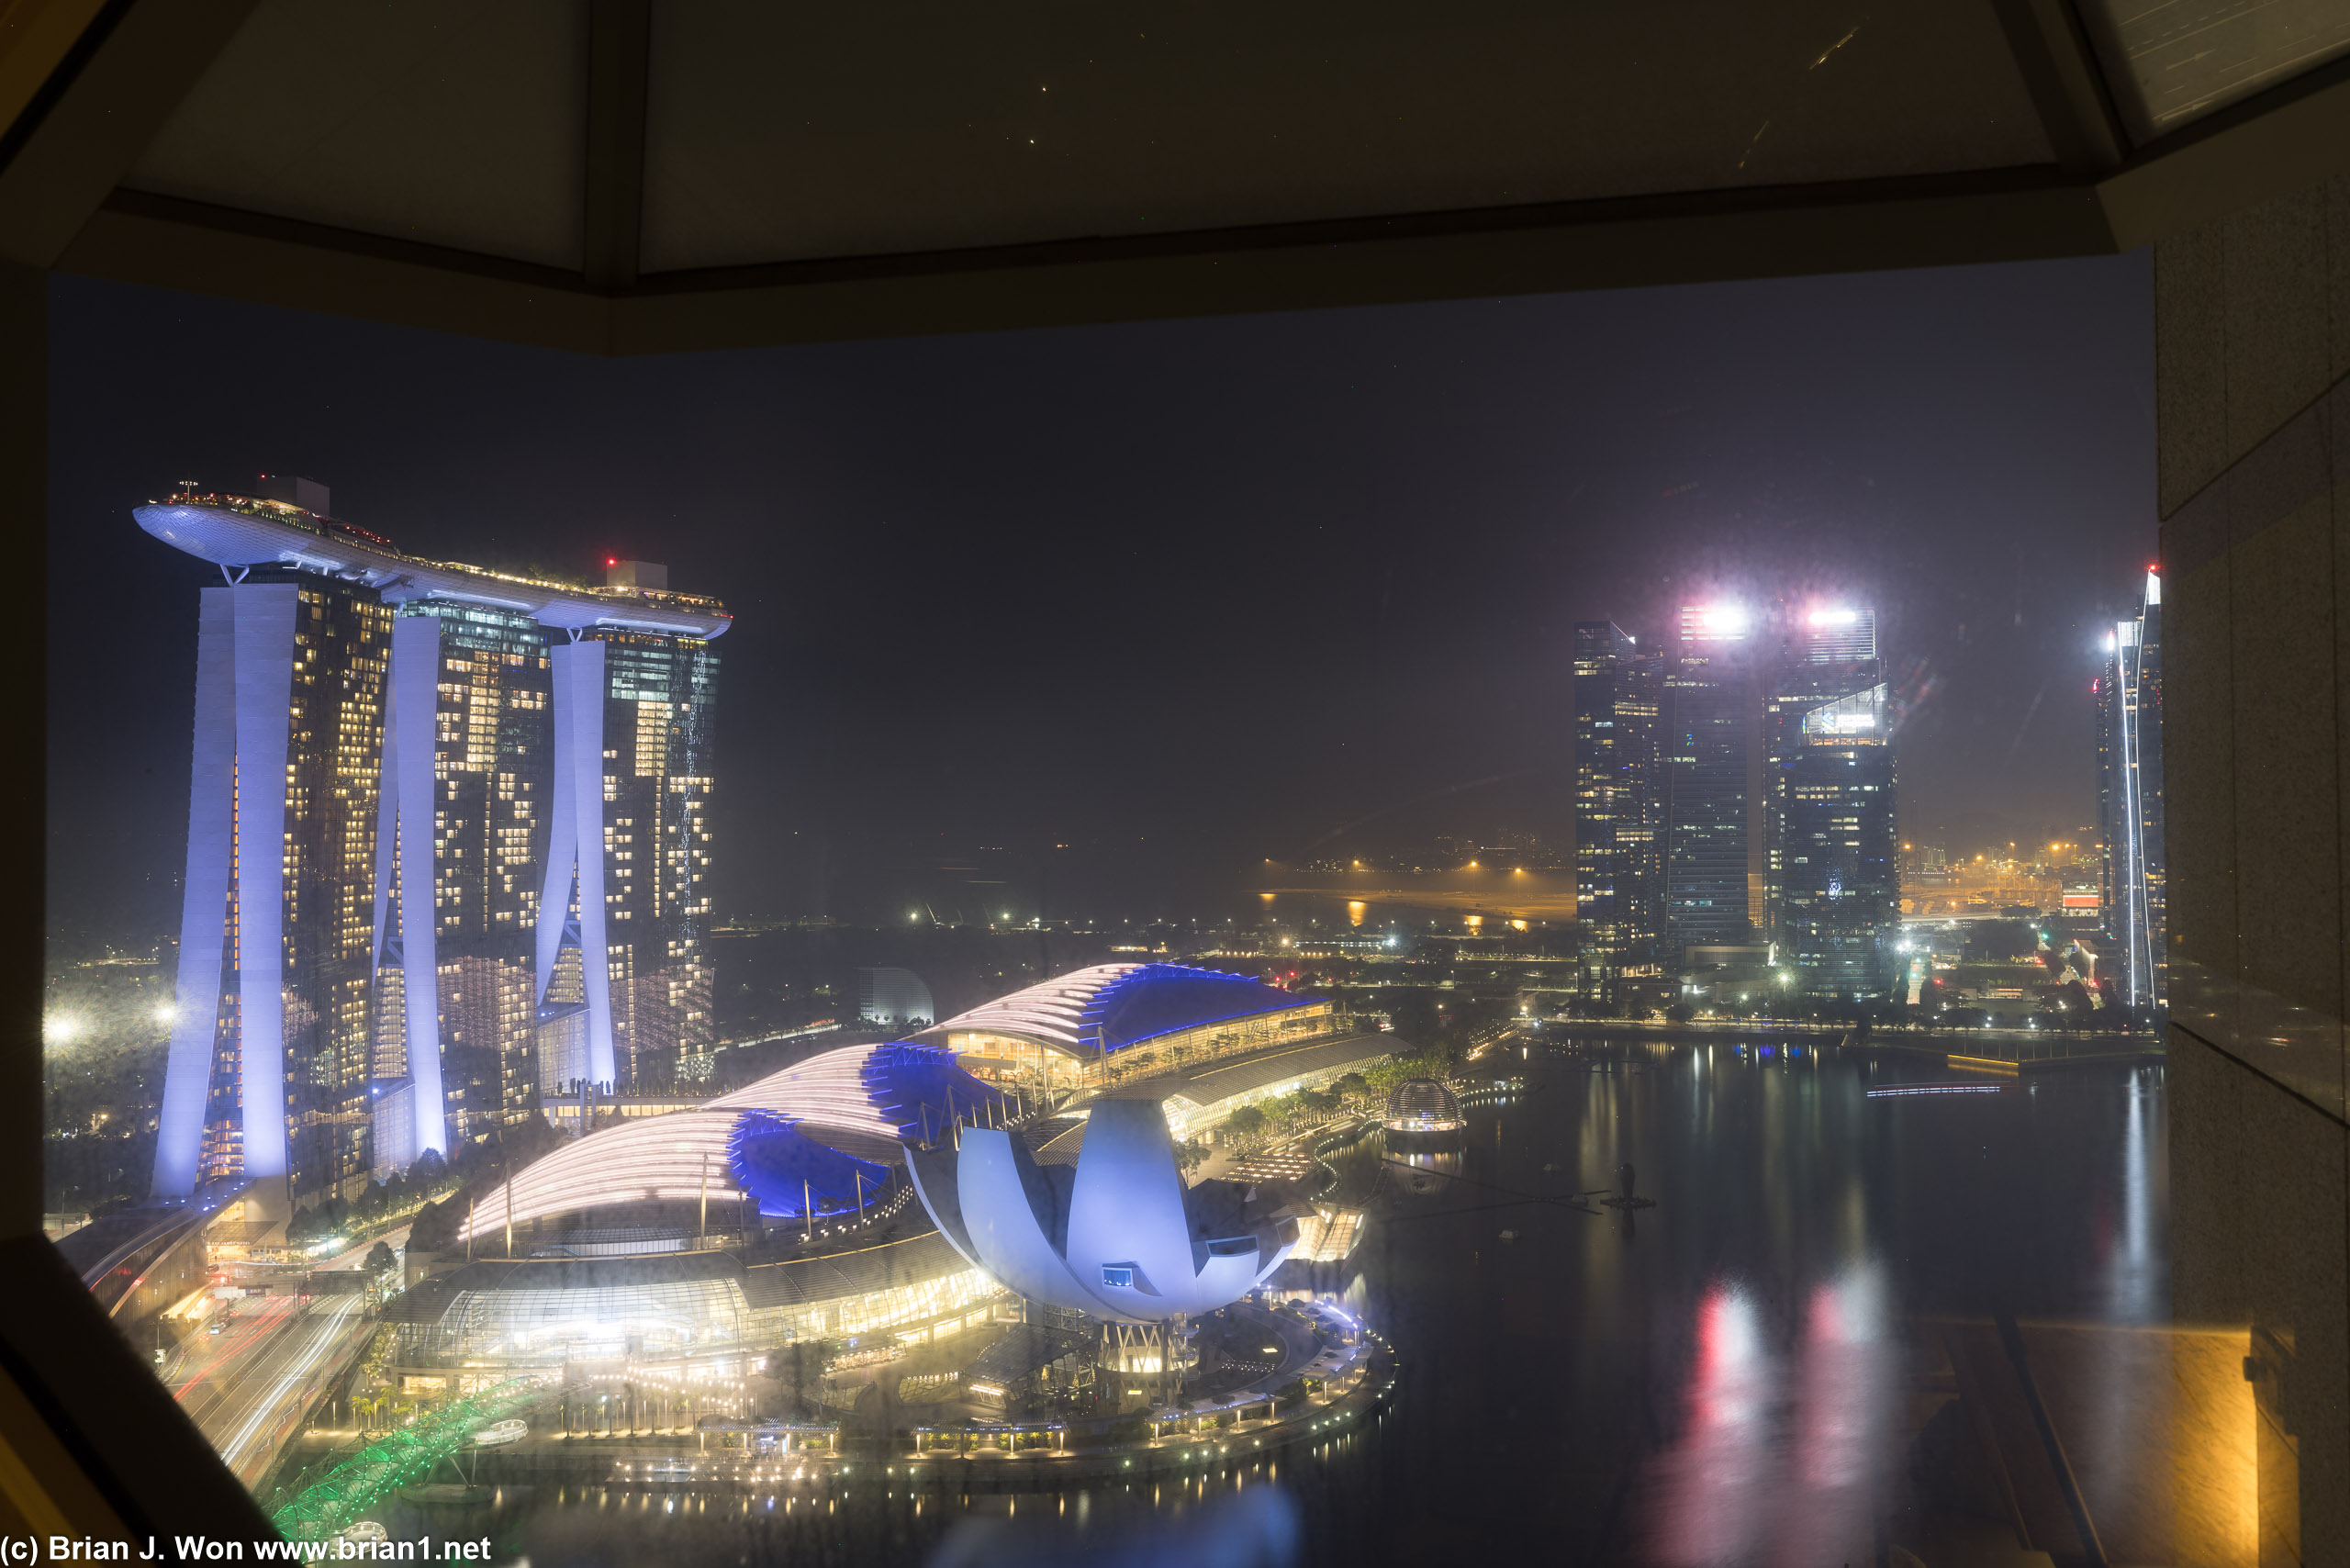 Marina Bay Sands and its shopping mall/conference center at left.